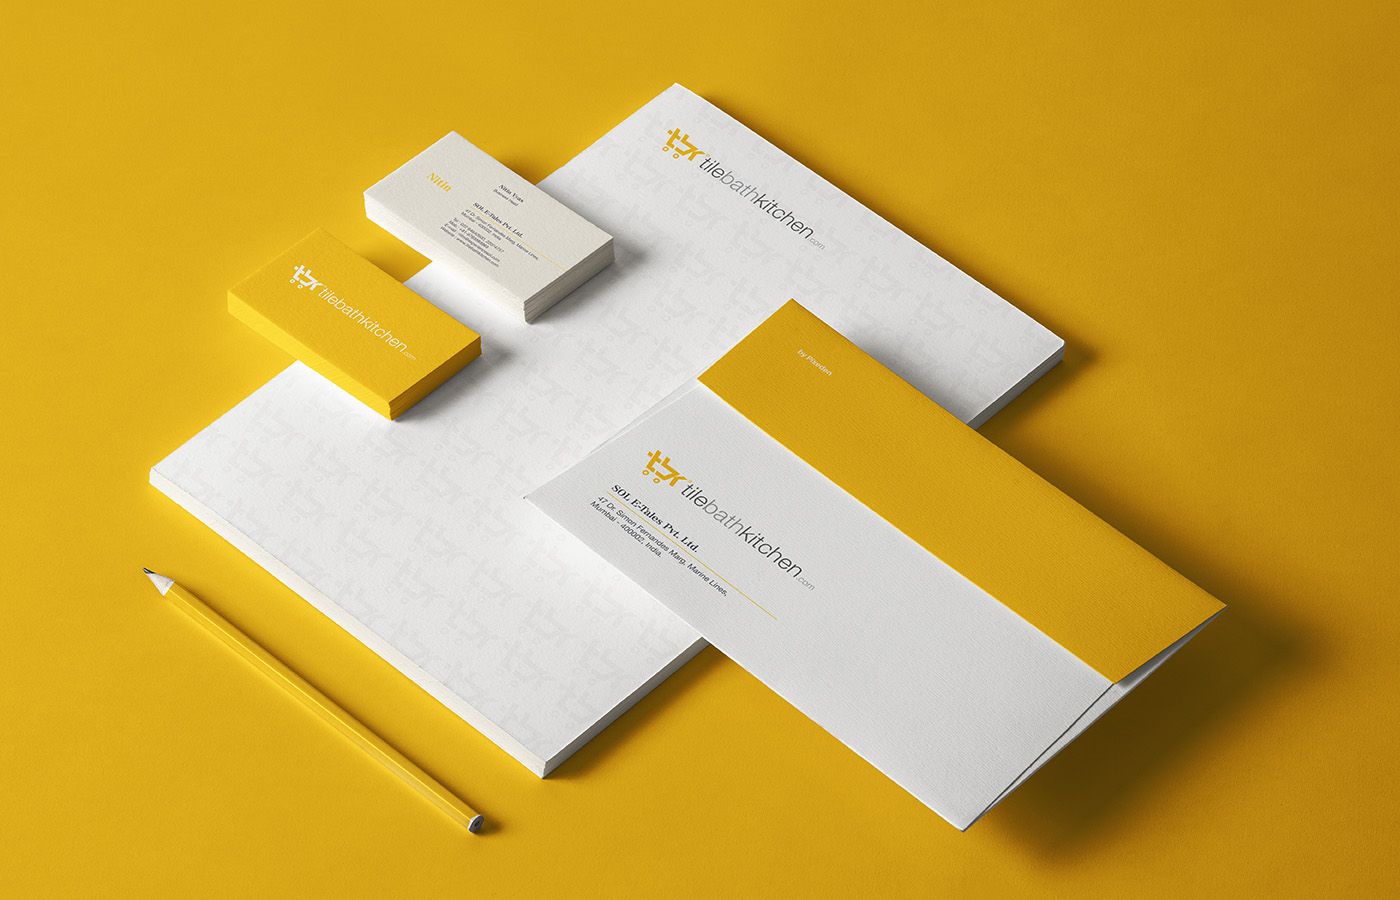 Creative ad agency and branding agency